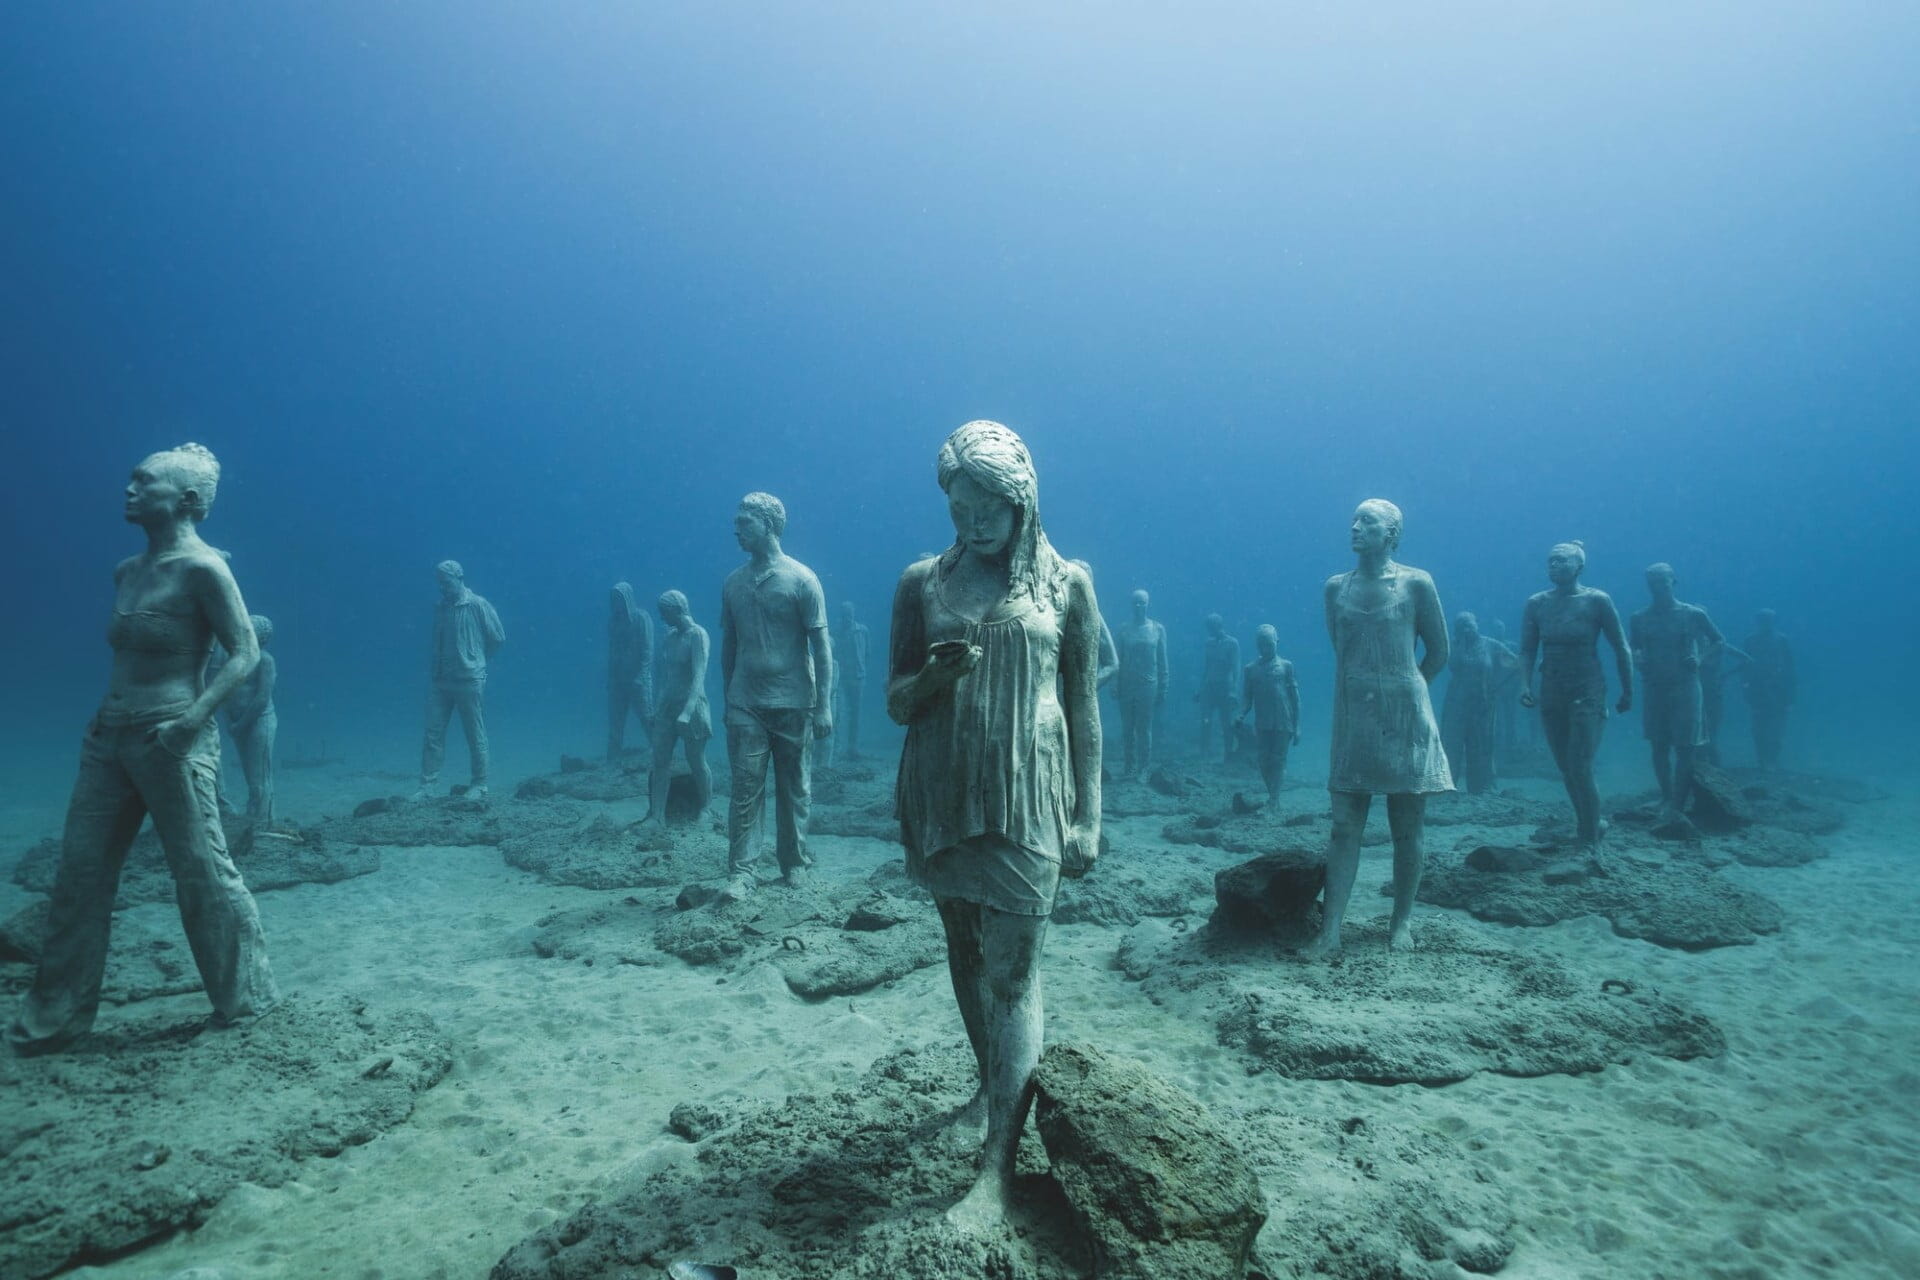 Jason deCaires Taylor, “Rubicon” (2016), stainless steel, pH-neutral cement, basalt and aggregates, installation view, Museo Atlántico, Las Coloradas, Lanzarote, Atlantic Oceanl. Photo courtesy of the artist